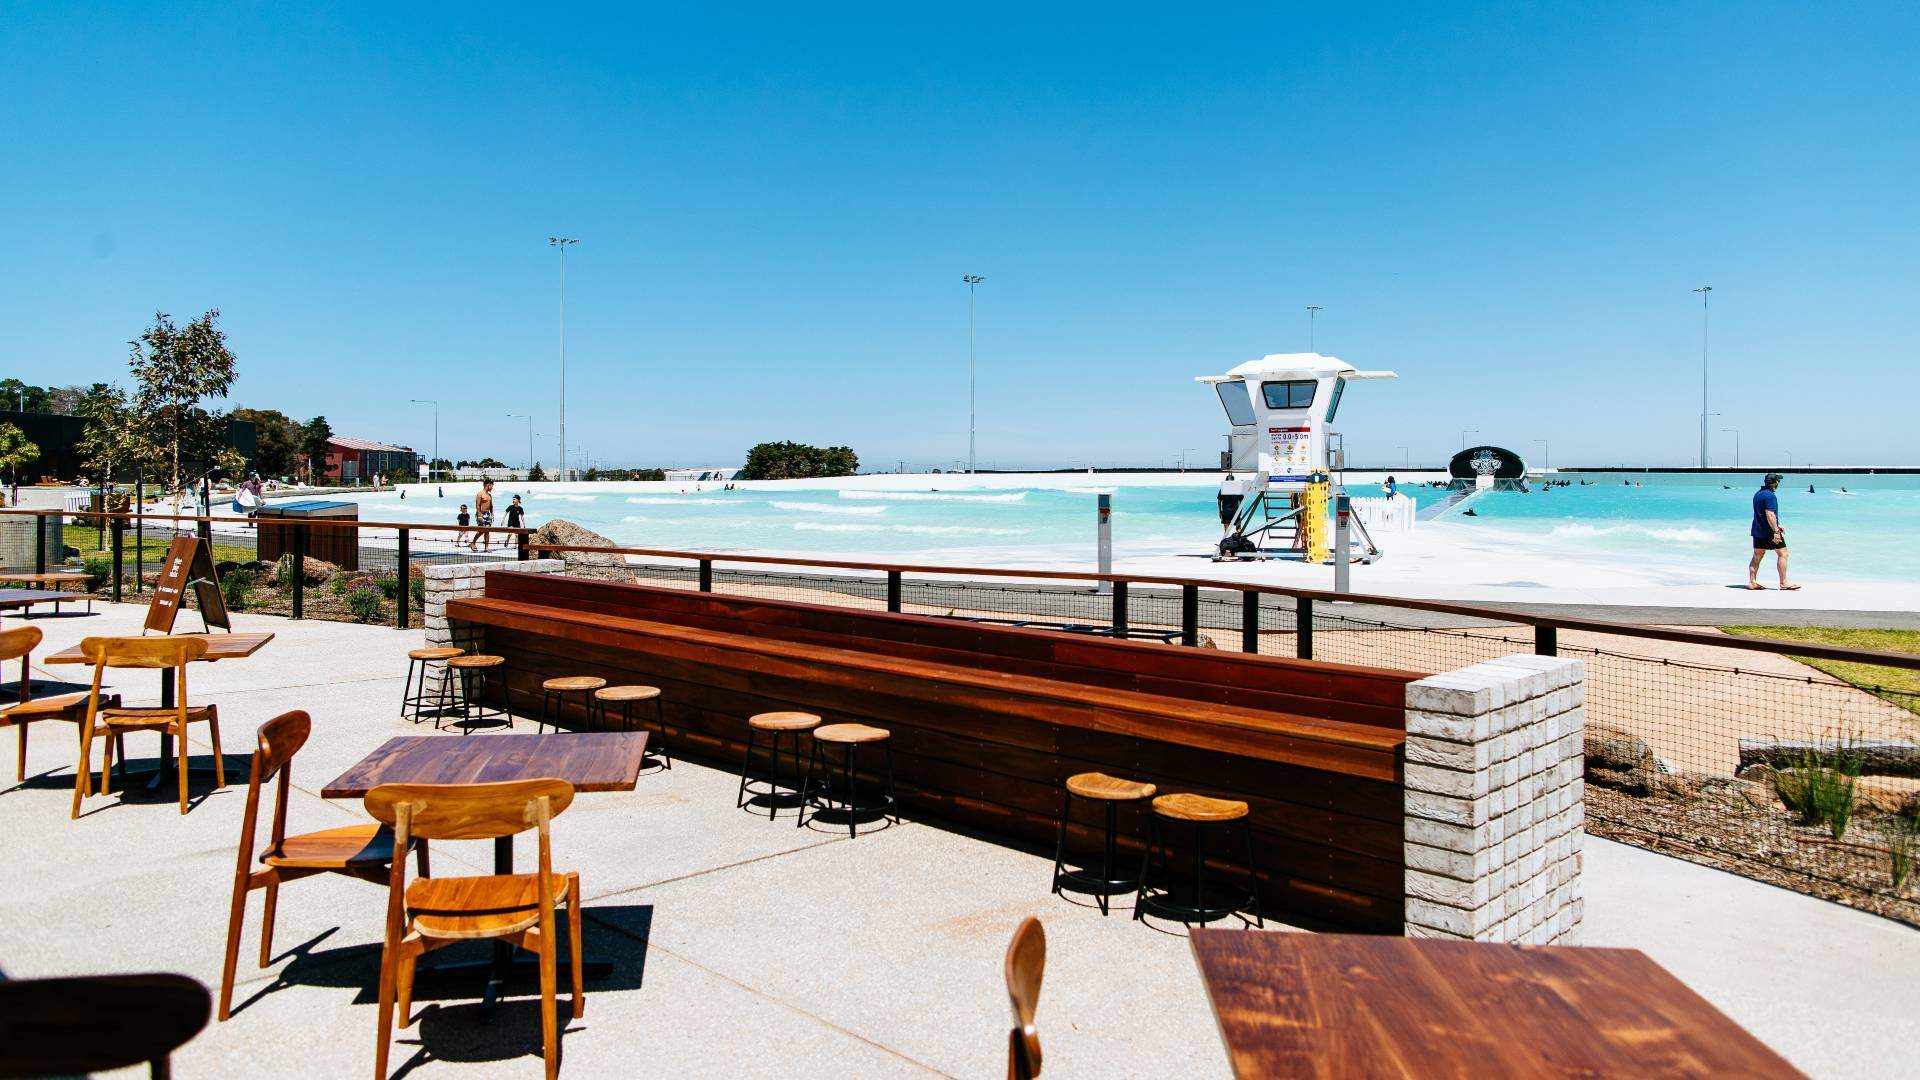 Three Blue Ducks' First Melbourne Outpost Has Made Its Home at Urbnsurf